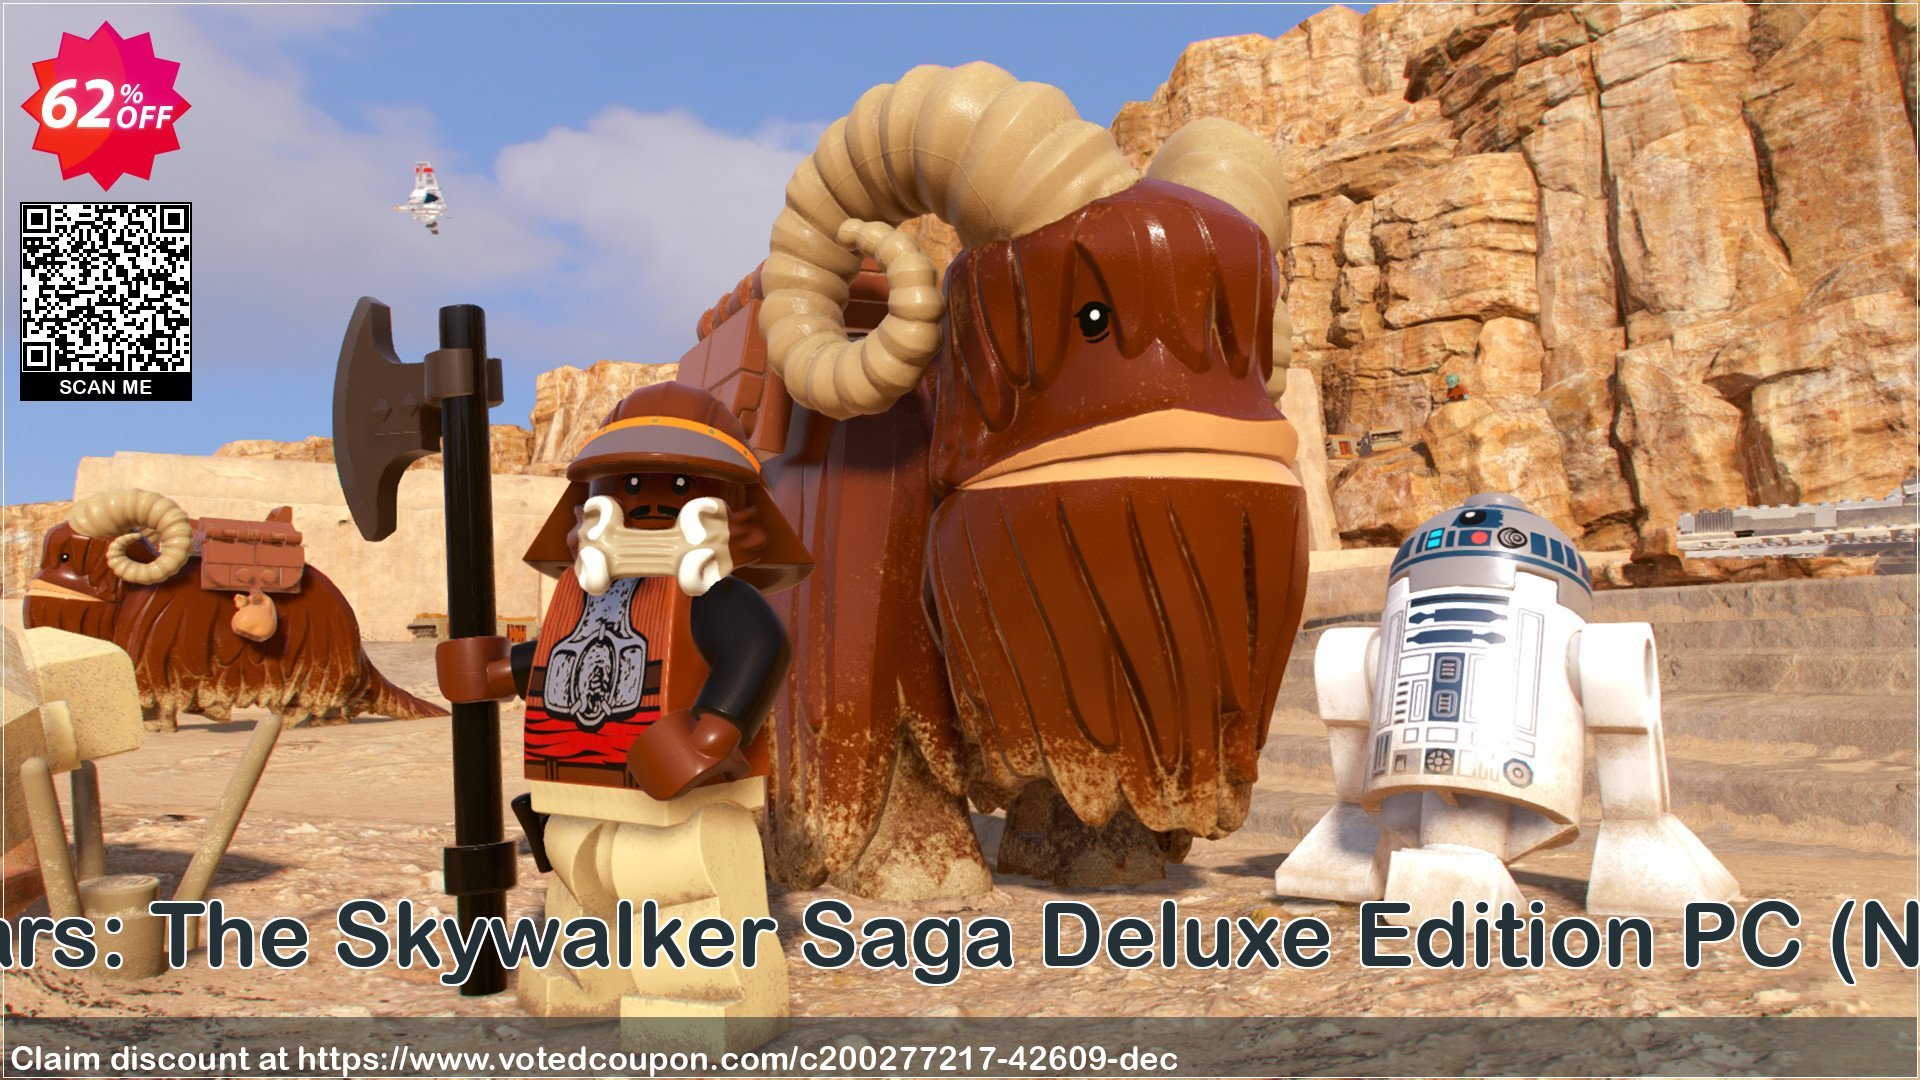 LEGO Star Wars: The Skywalker Saga Deluxe Edition PC, North America  Coupon Code May 2024, 62% OFF - VotedCoupon